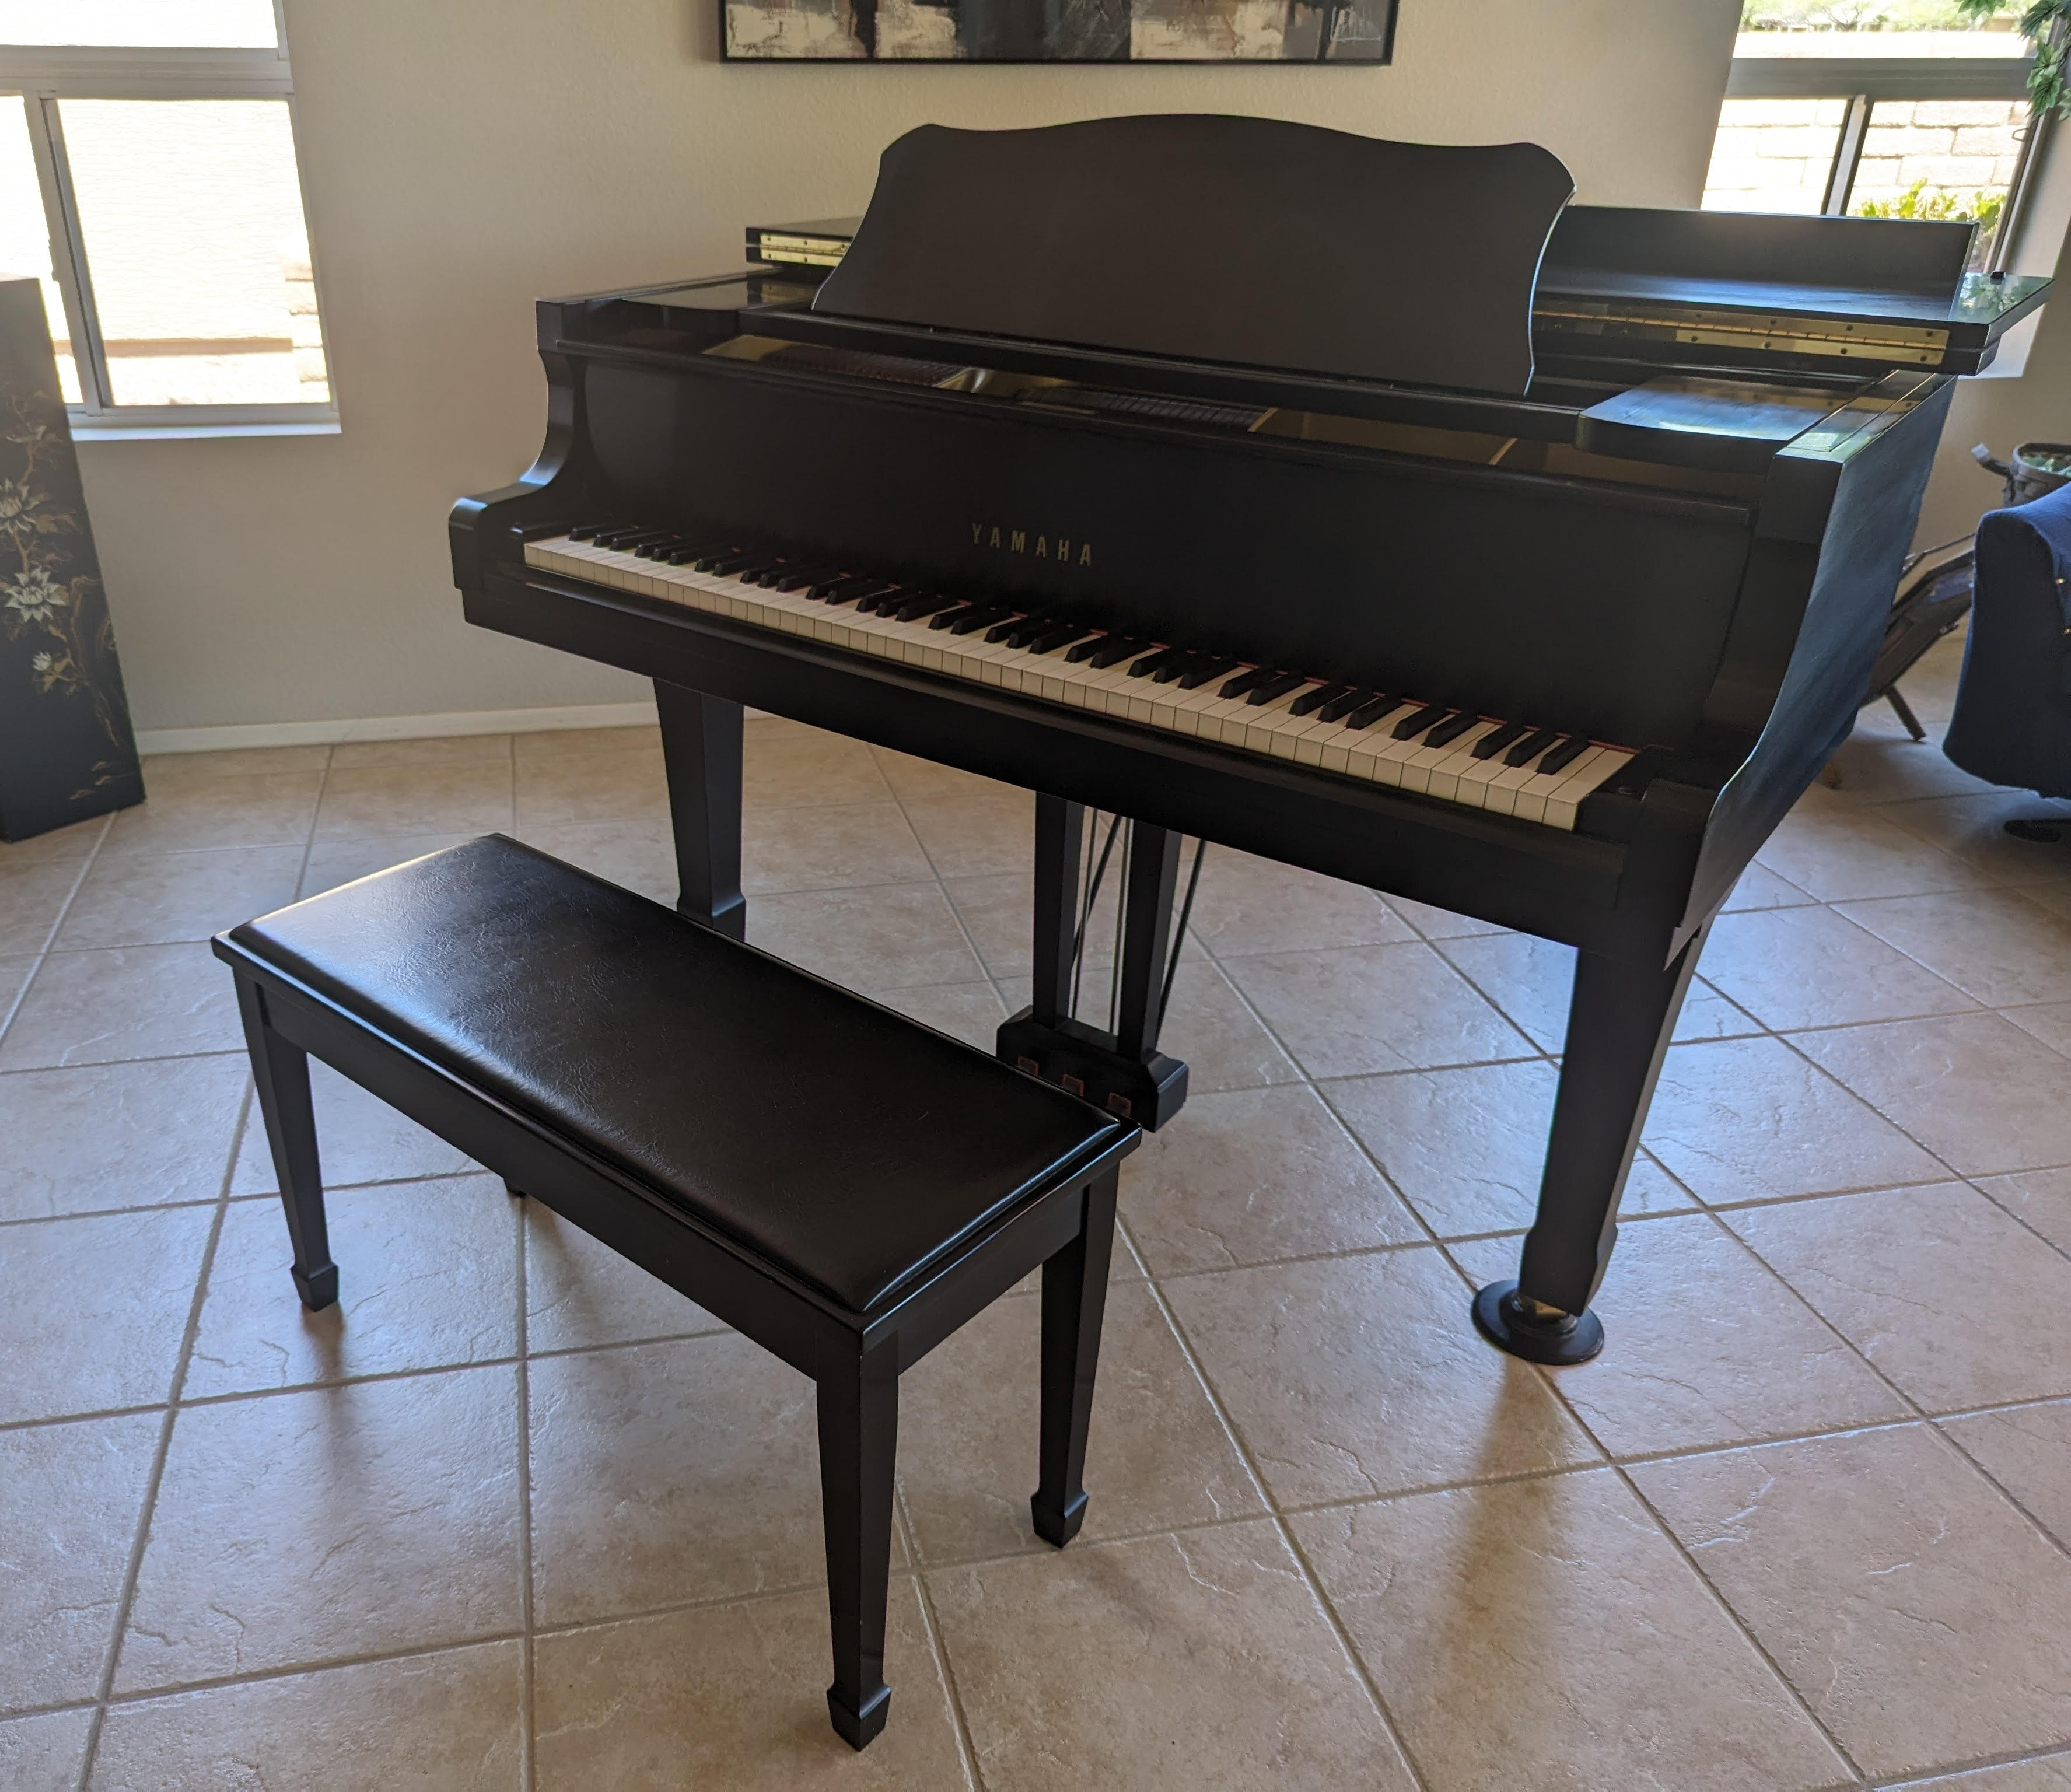 Well maintained Piano